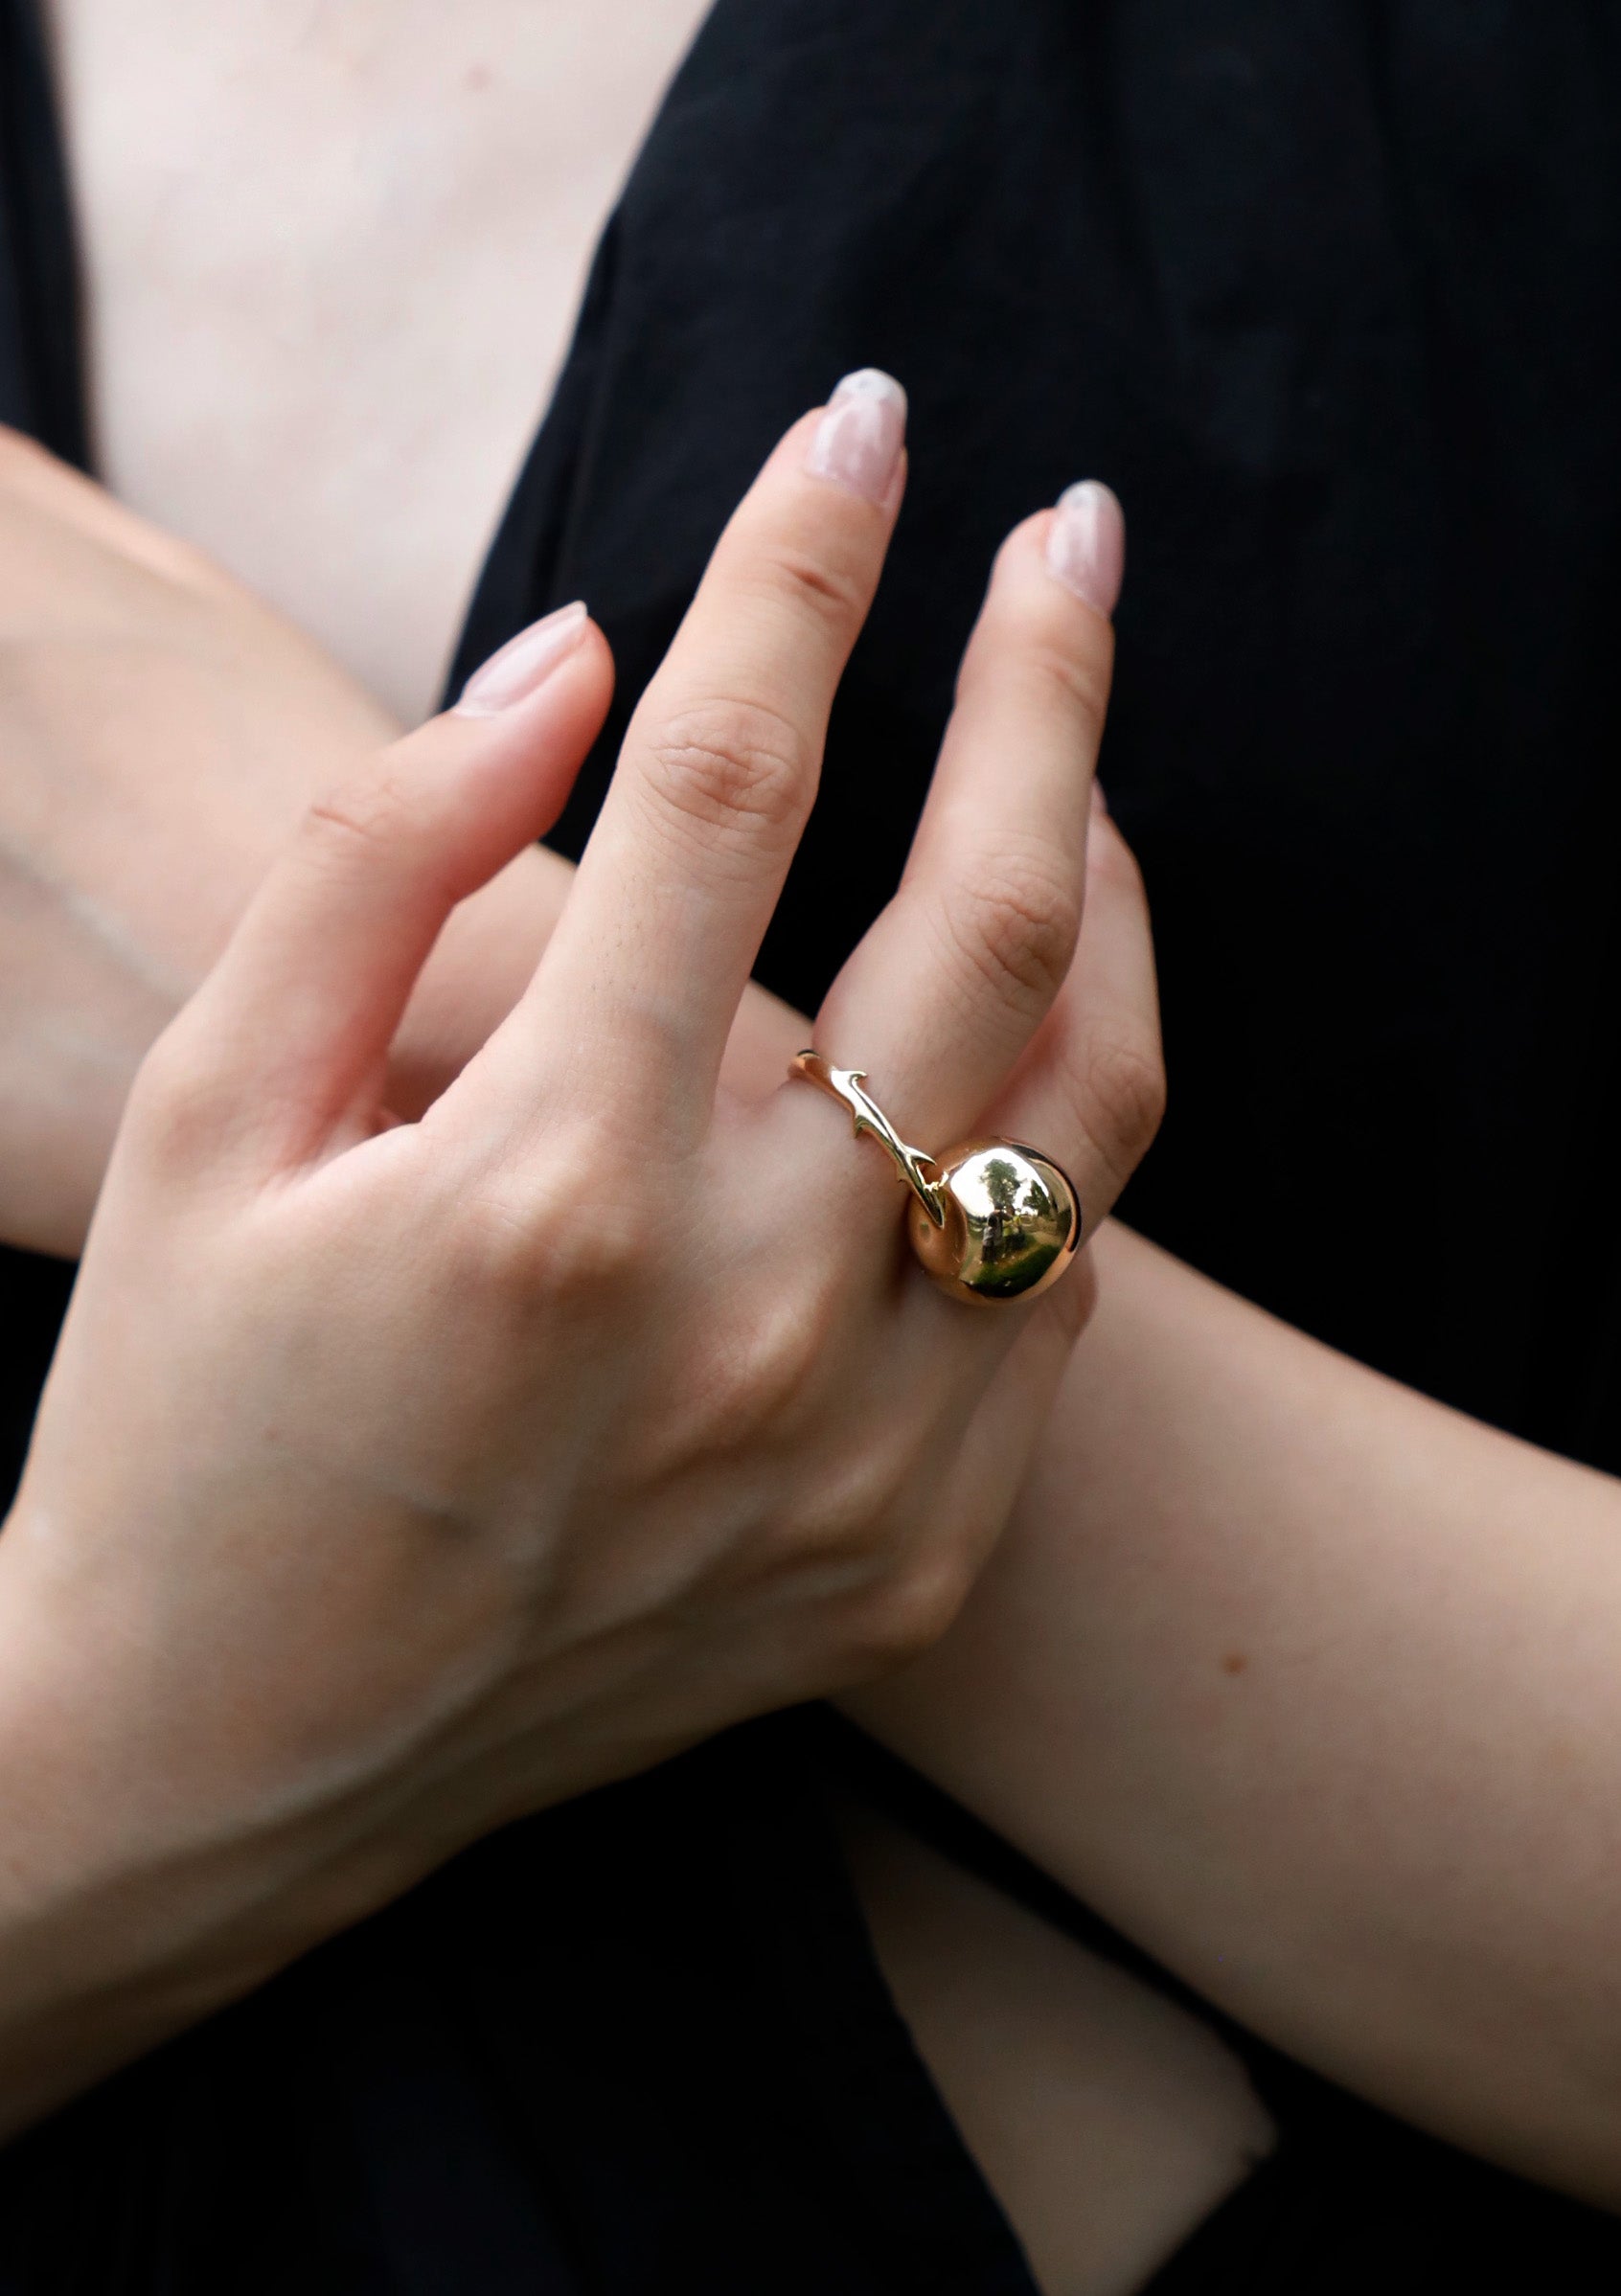 The "Pearl Ring"